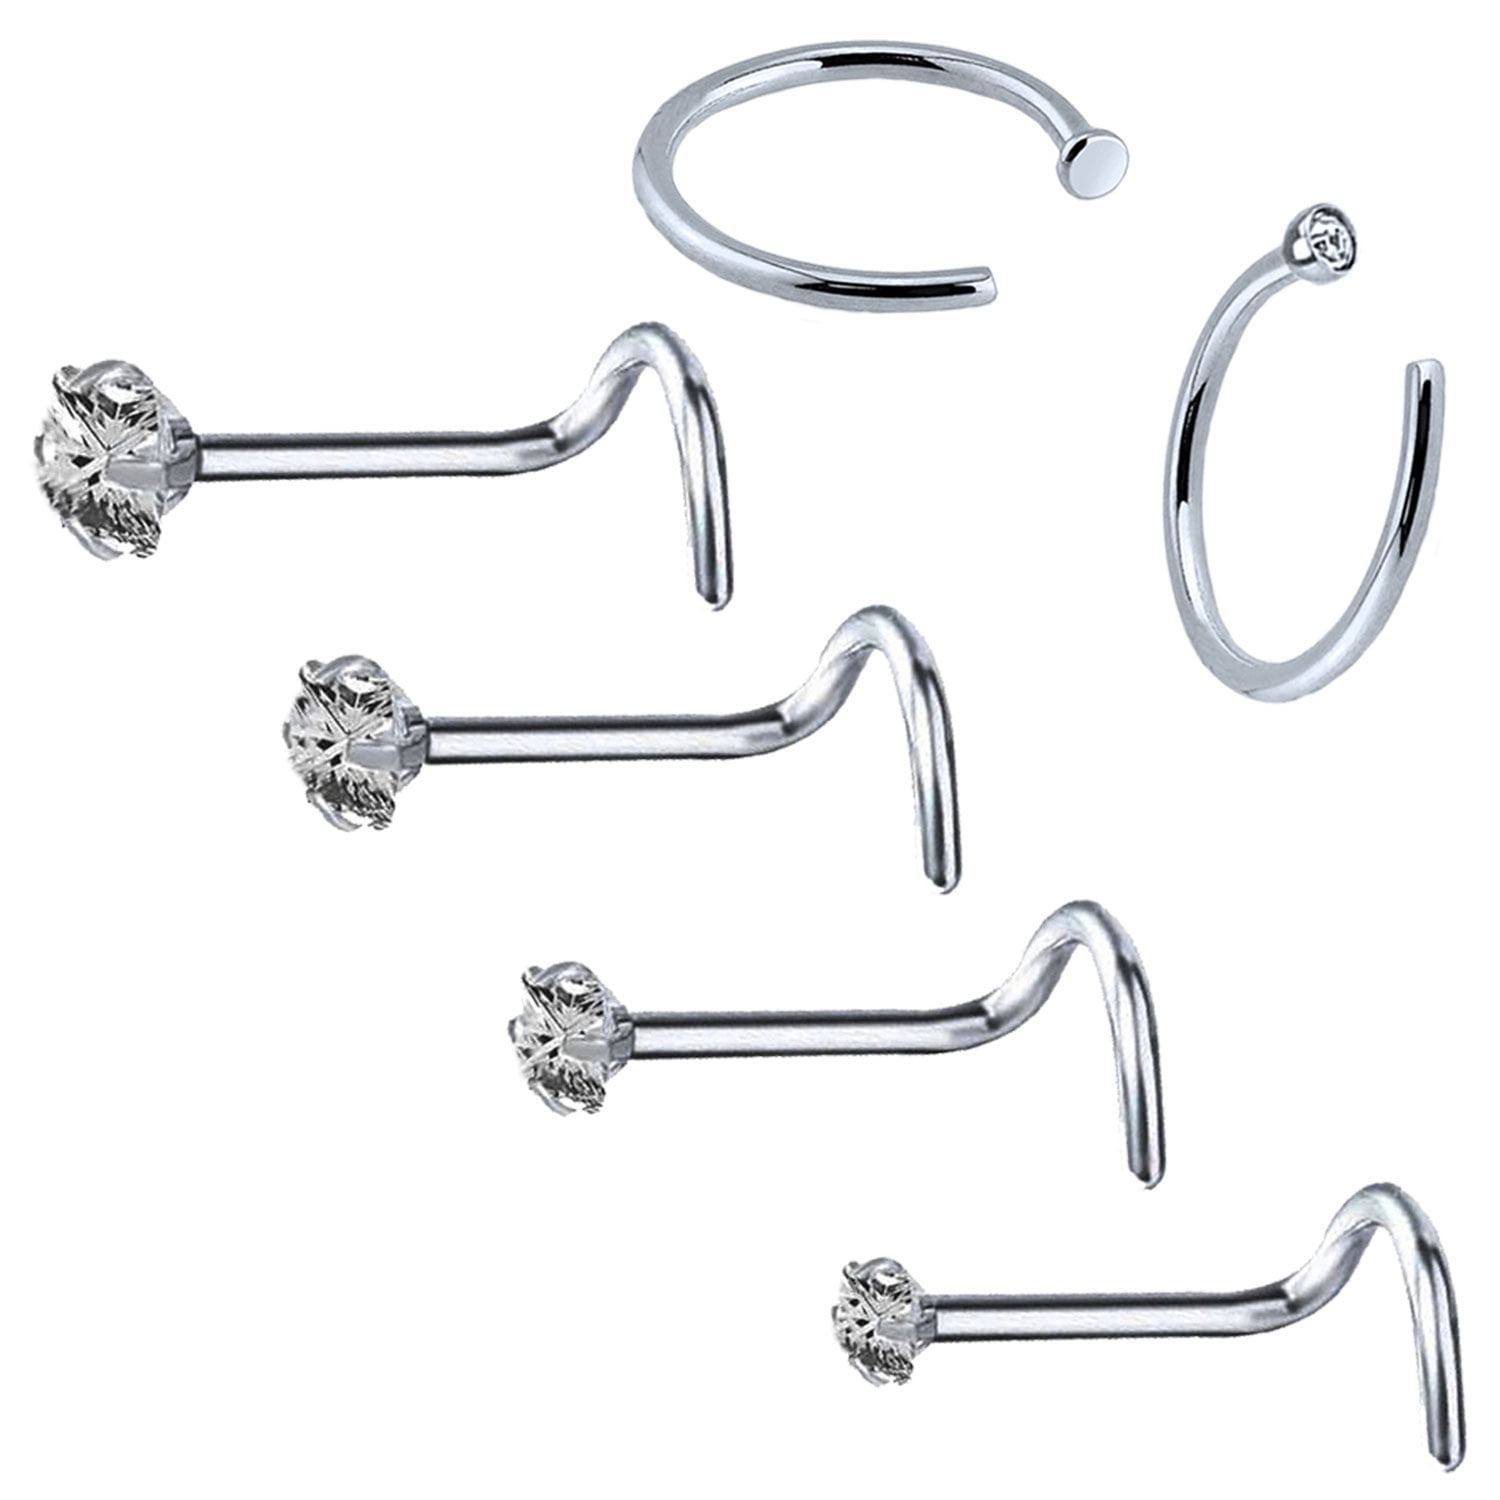 KITTY CAT FACE 20G NOSE RING STUD BONE STEEL PIERCING JEWELRY 4 Colors Available 